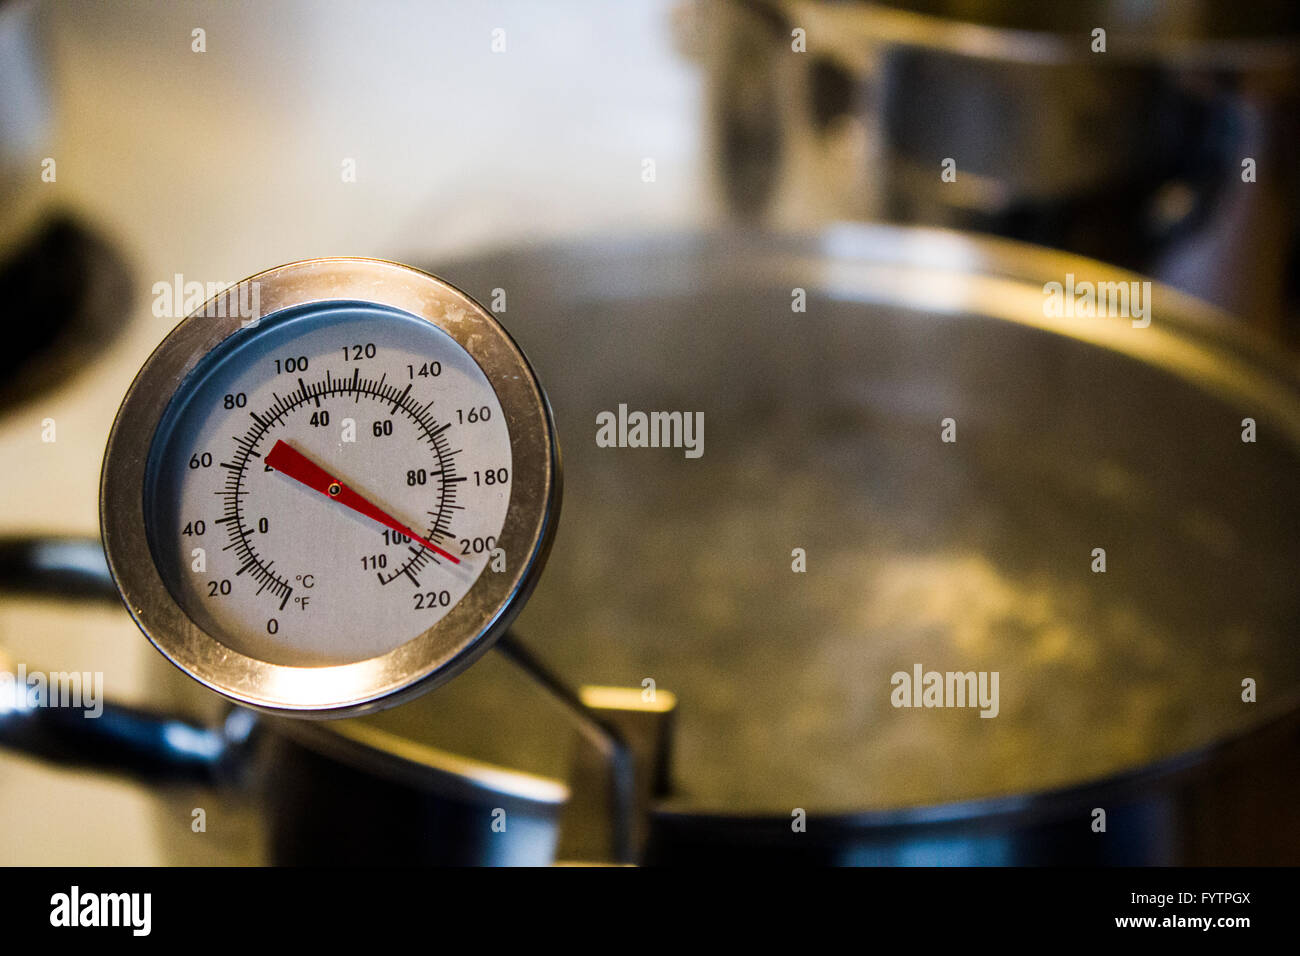 https://c8.alamy.com/comp/FYTPGX/boiling-water-in-pot-with-thermometer-part-of-home-brewing-series-FYTPGX.jpg